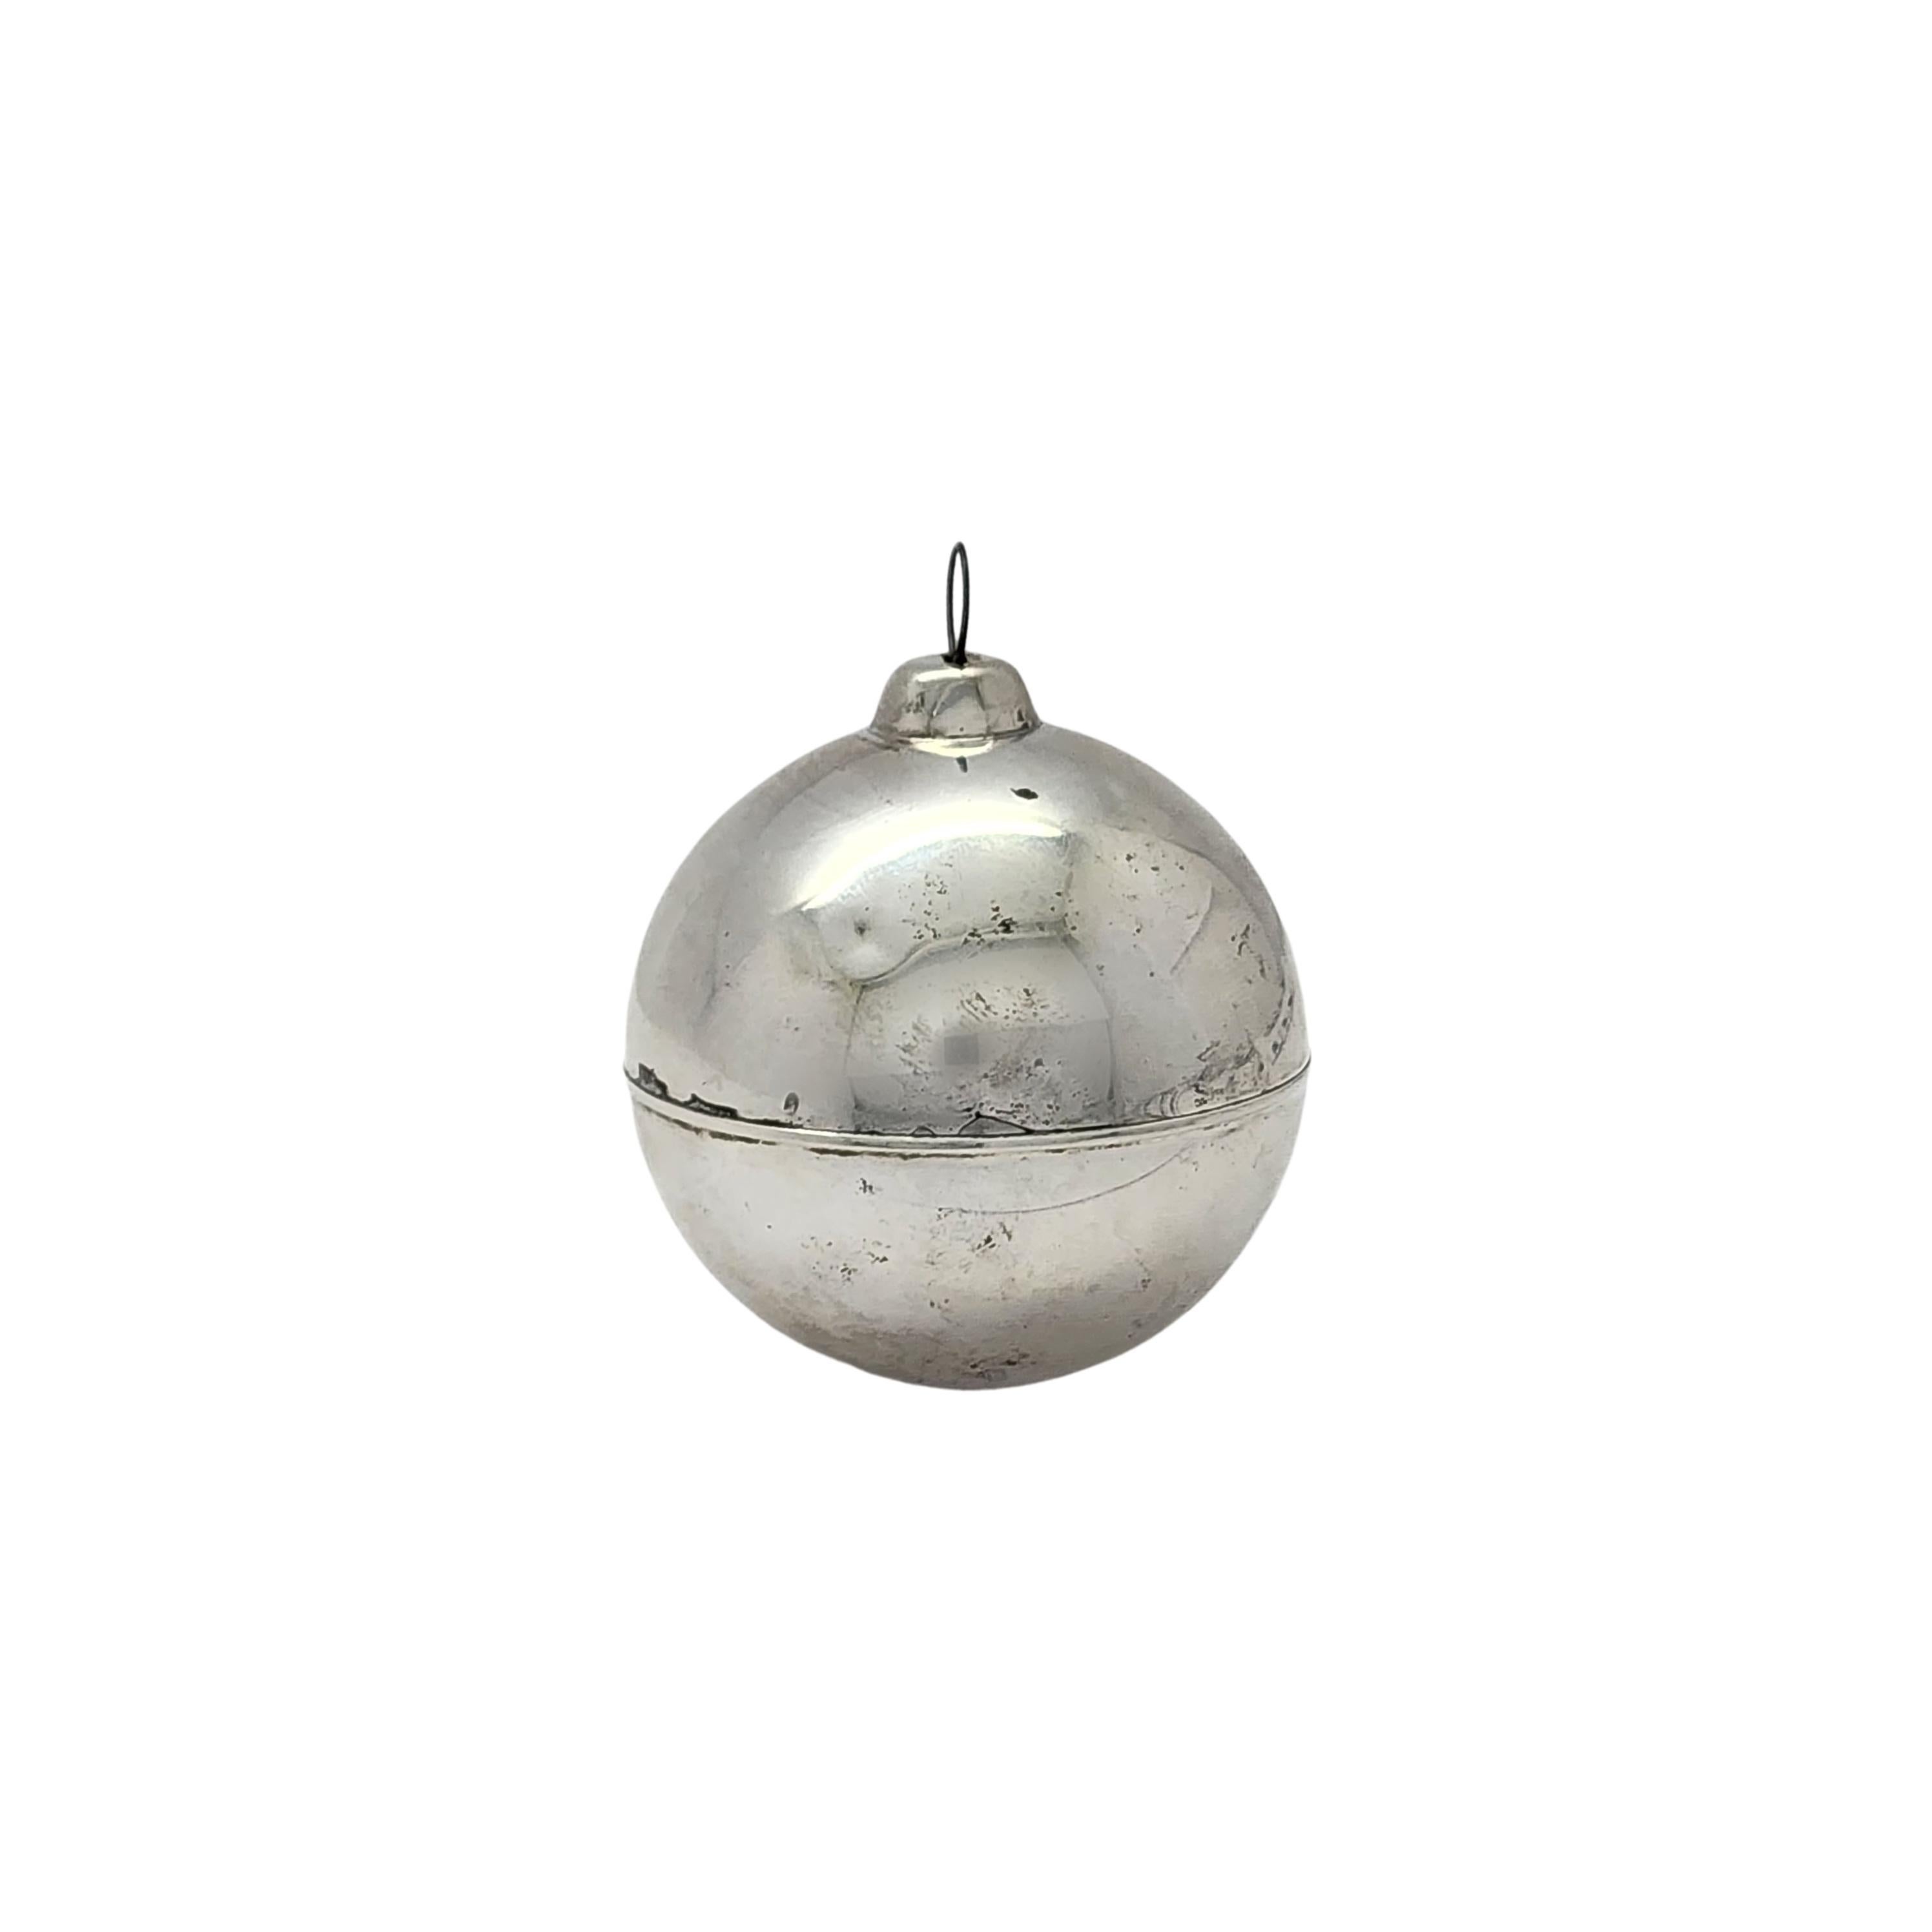 Towle sterling silver Christmas tree ball ornament.

Classic and simple sterling silver Christmas ball with a smooth polished finish.

Measures approx 2